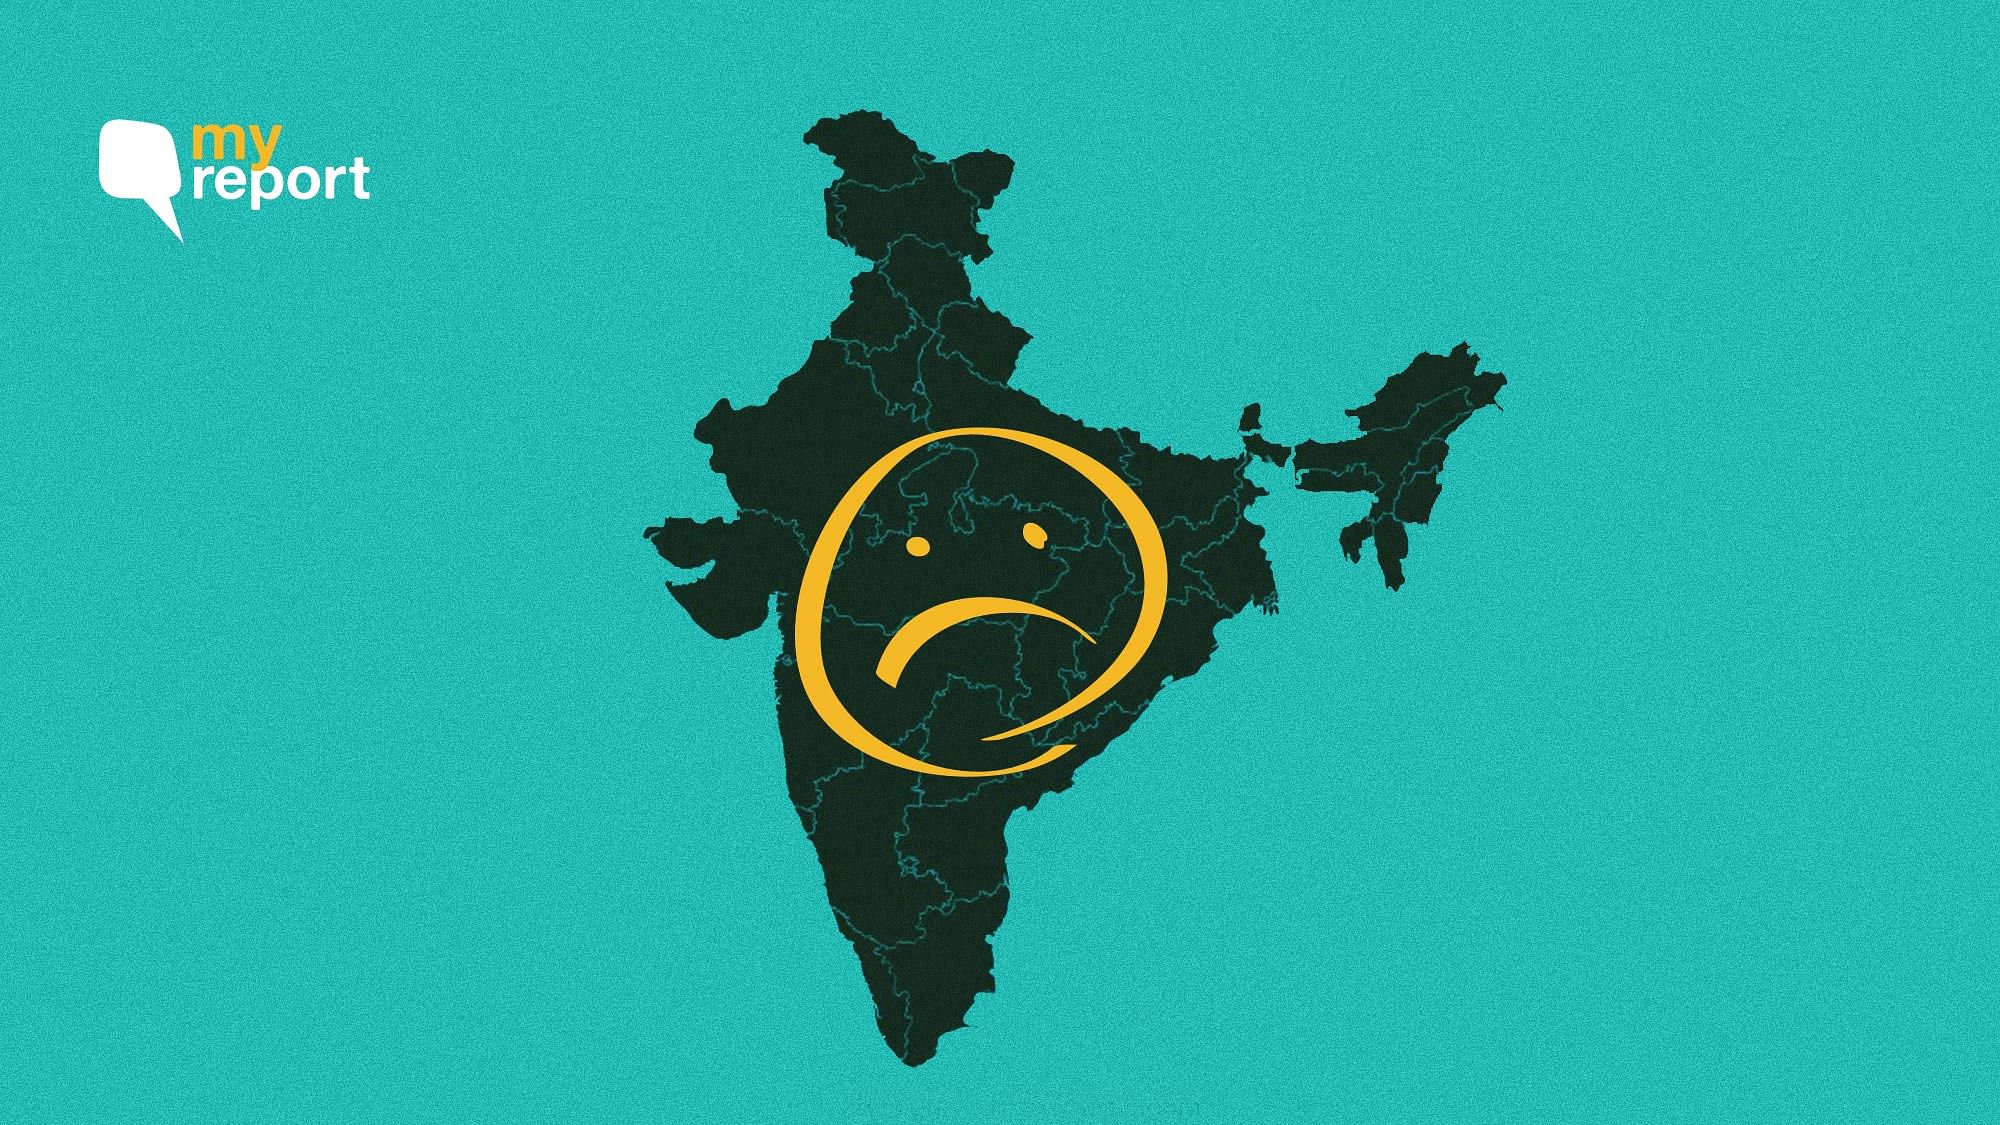 According to a UN Report, India was ranked 133rd in the global list of the happiest countries